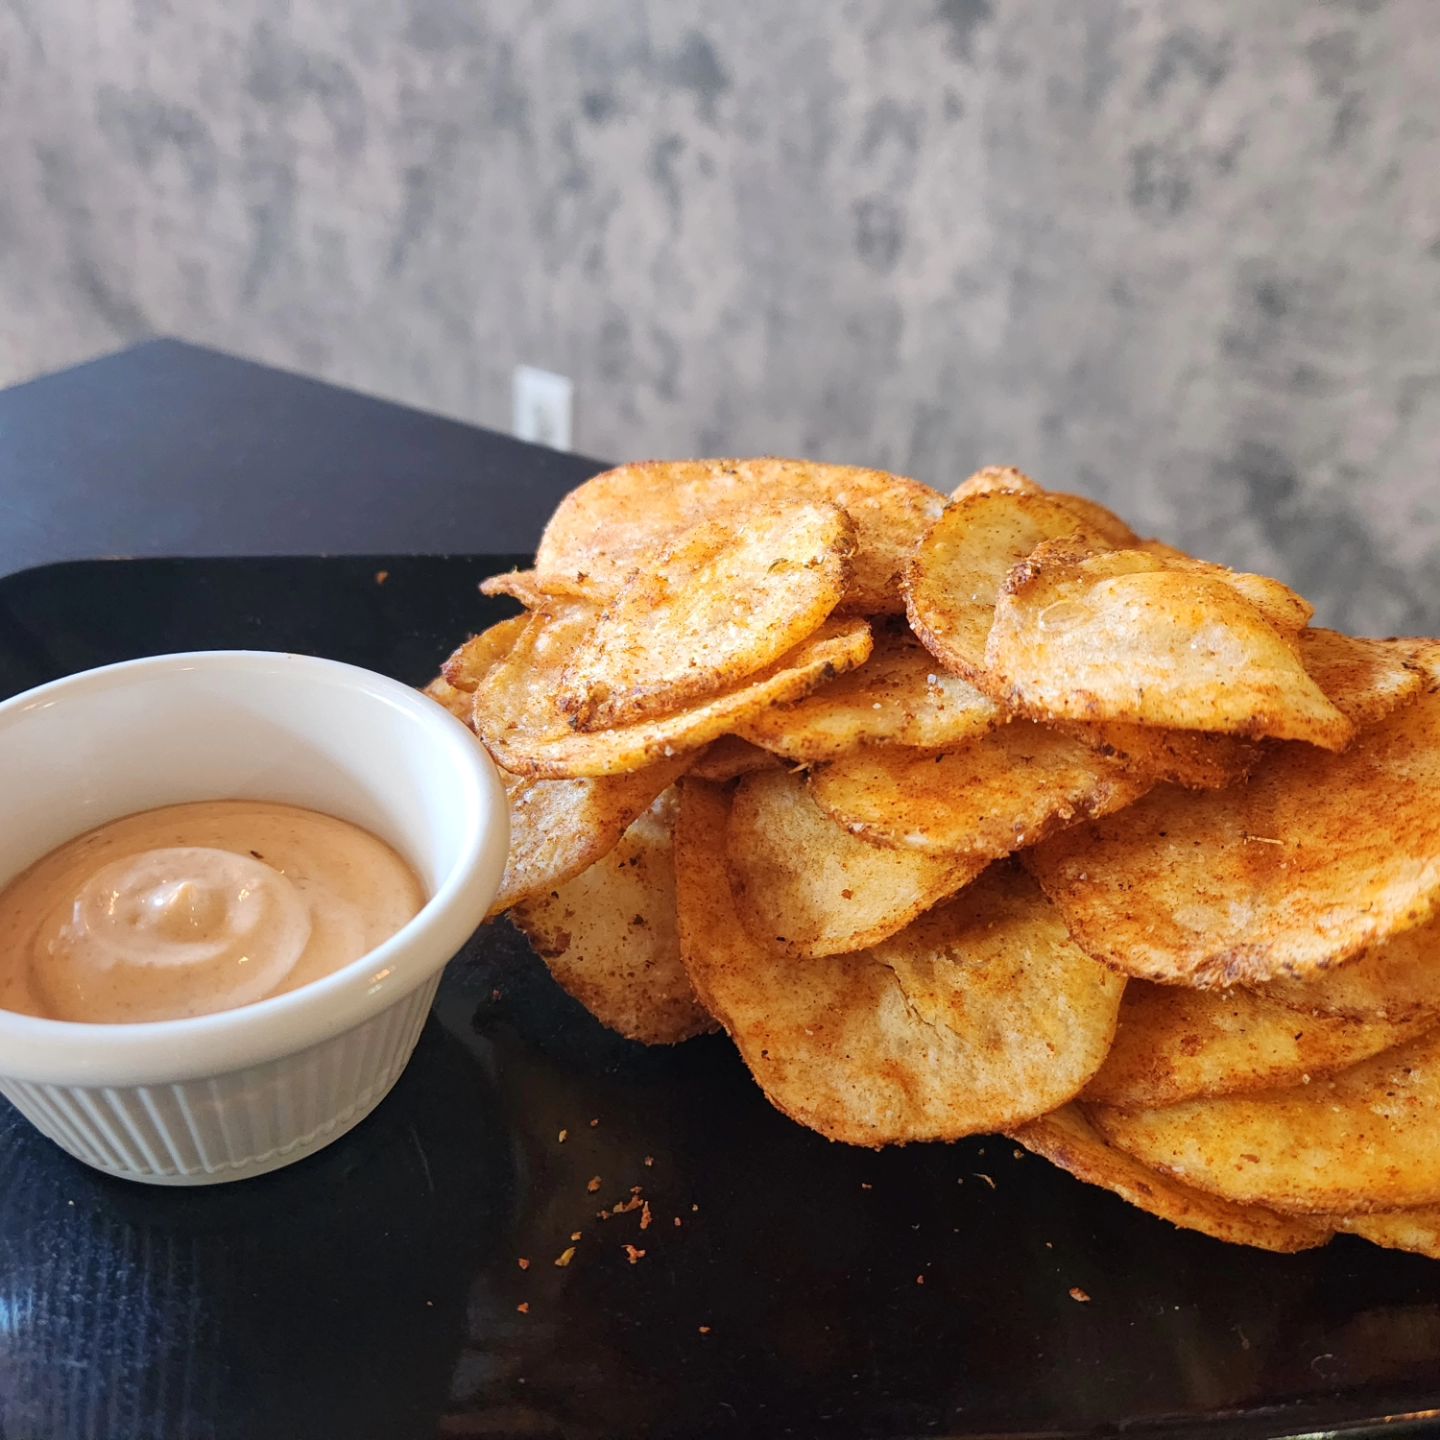 Potato Chips and dip on a plate